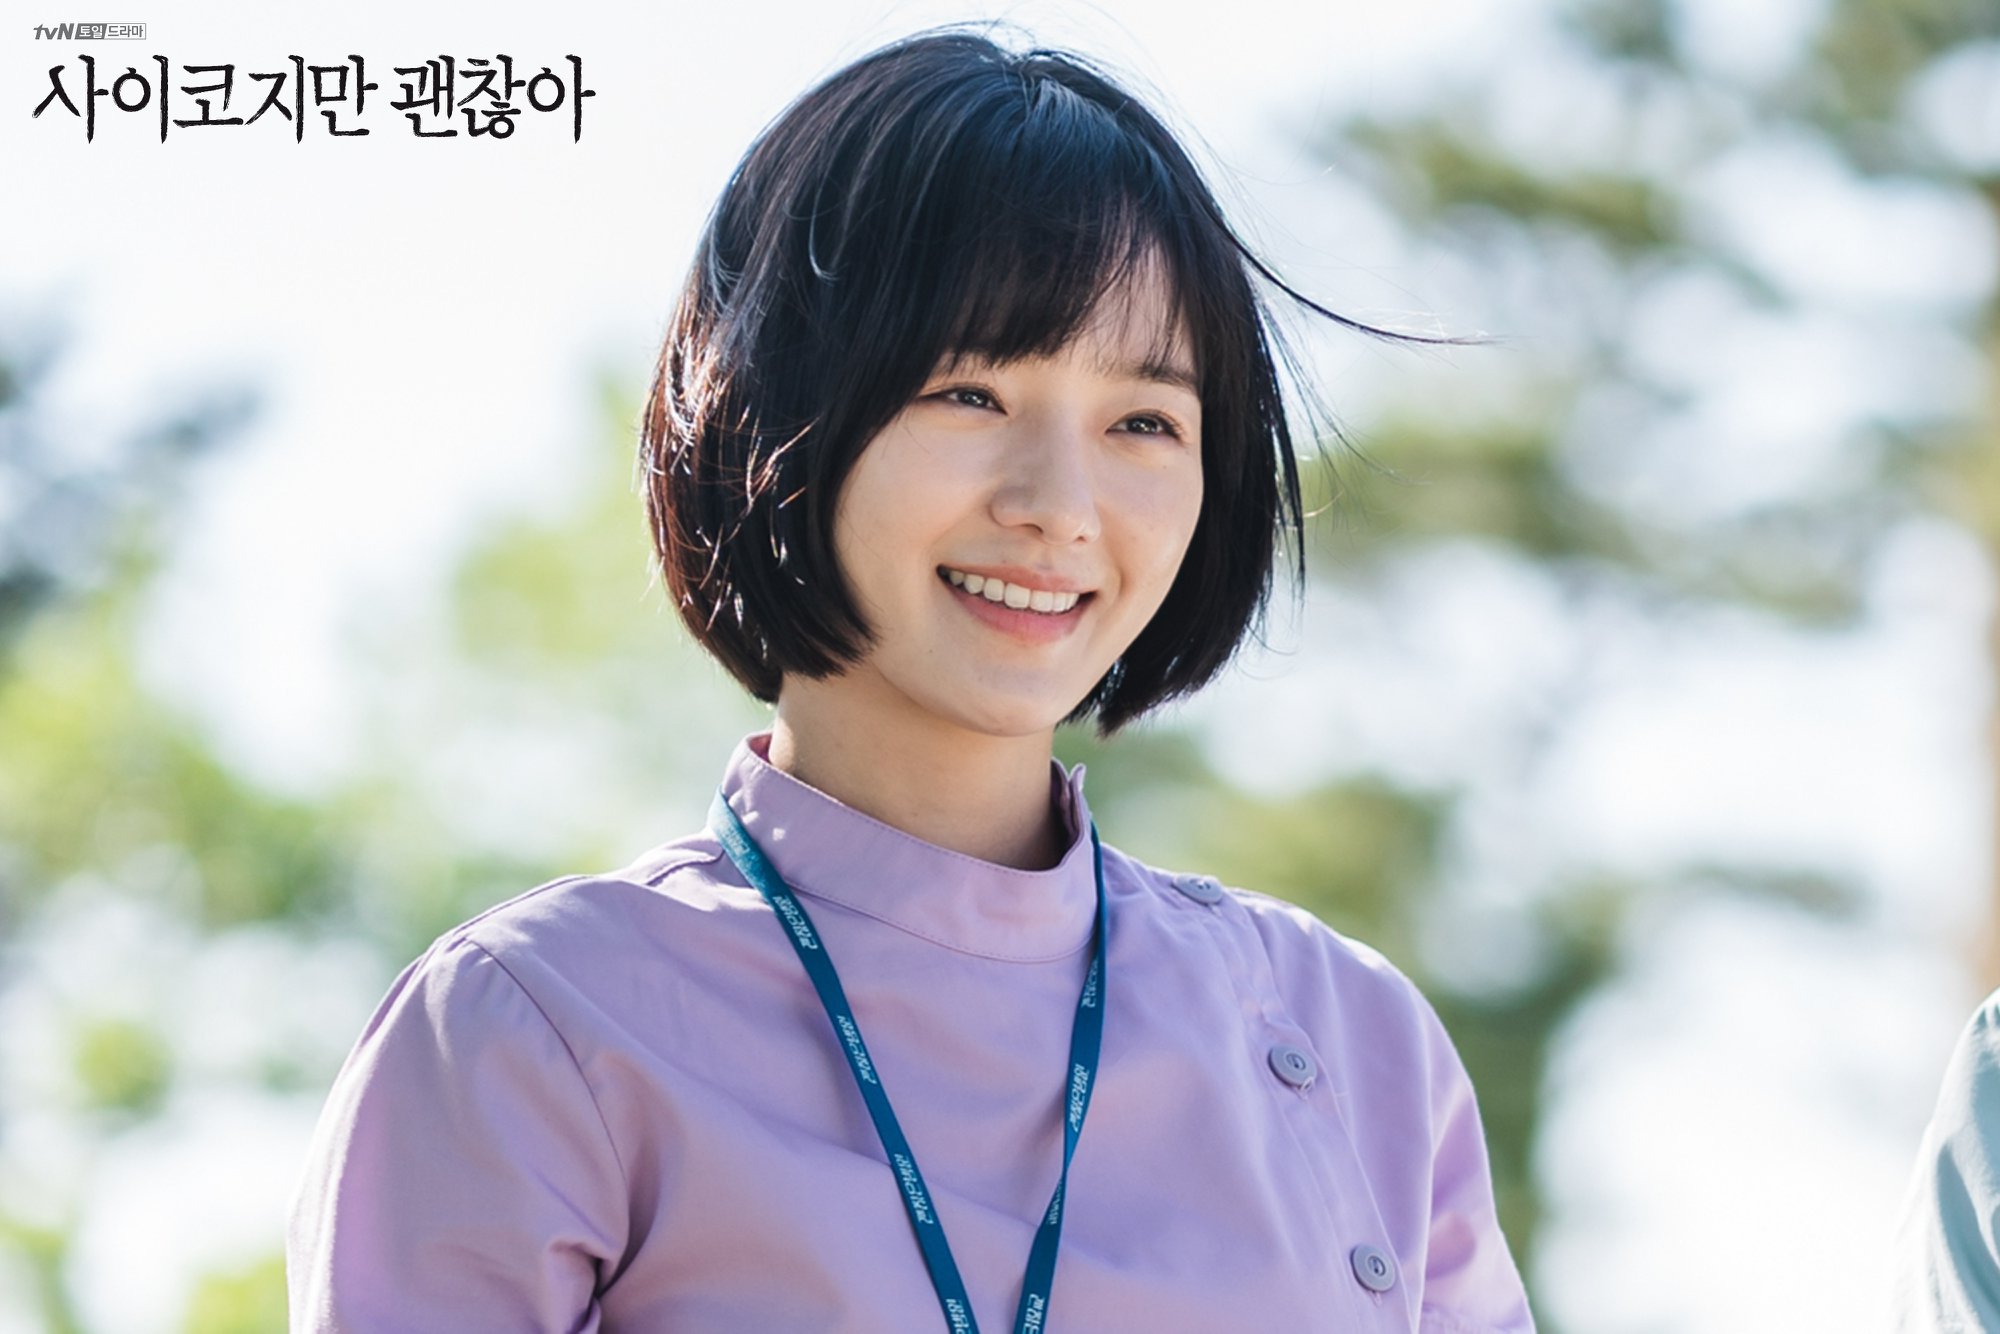 Actress Park GyuYoung From "It's Okay To Not Be Okay" Majors In Human Ecology & Cast By JYP - Kpopmap